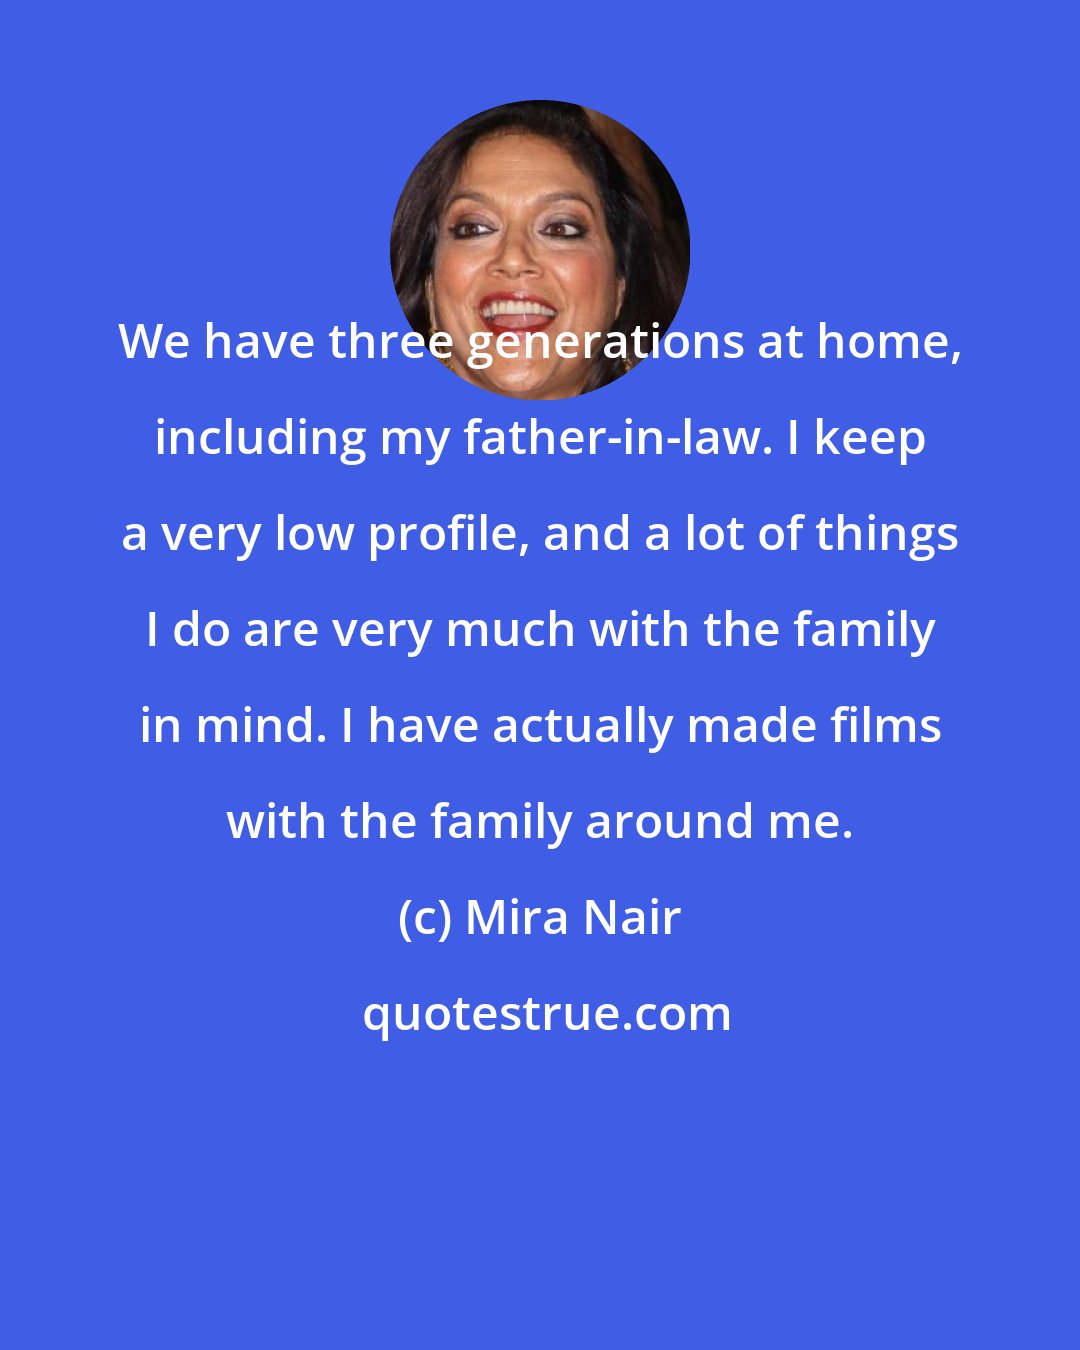 Mira Nair: We have three generations at home, including my father-in-law. I keep a very low profile, and a lot of things I do are very much with the family in mind. I have actually made films with the family around me.